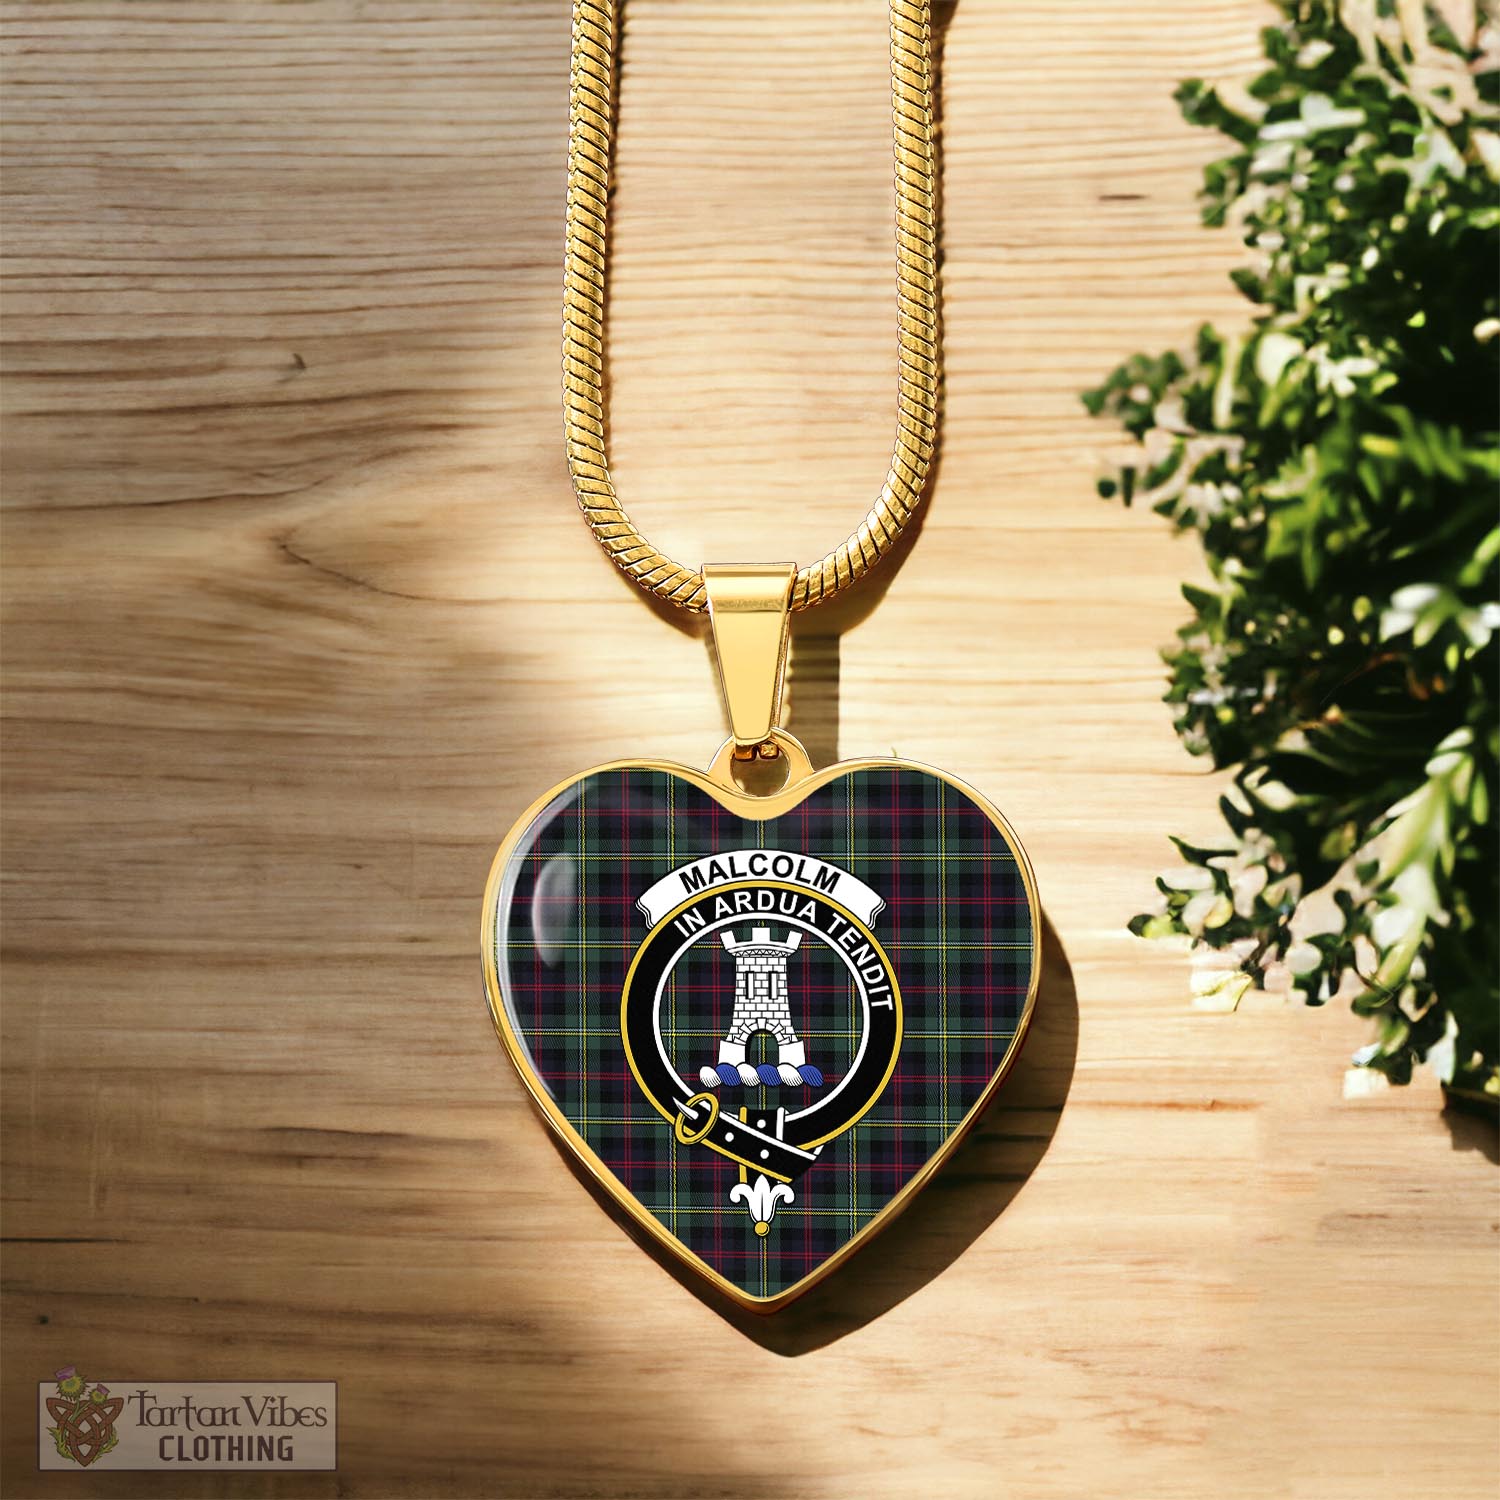 Tartan Vibes Clothing Malcolm Modern Tartan Heart Necklace with Family Crest